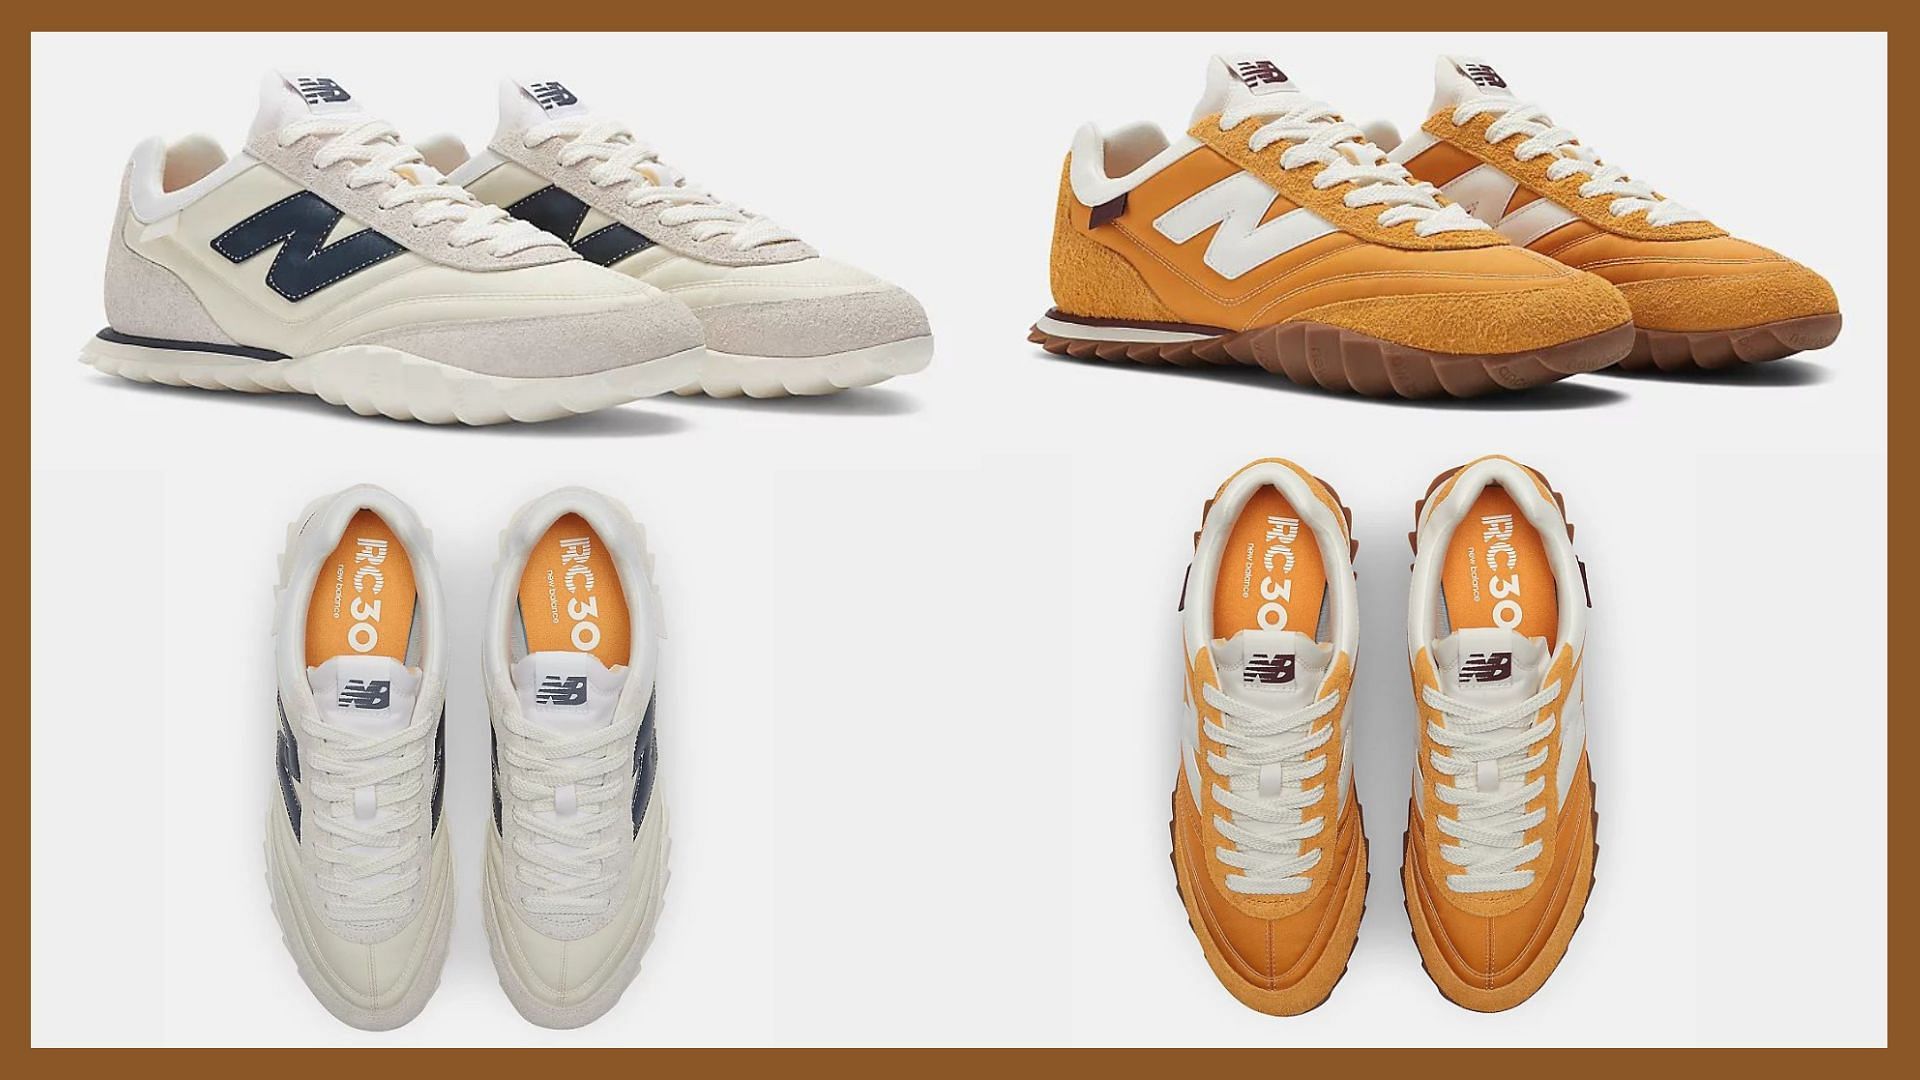 4 upcoming 2022 releases of New Balance